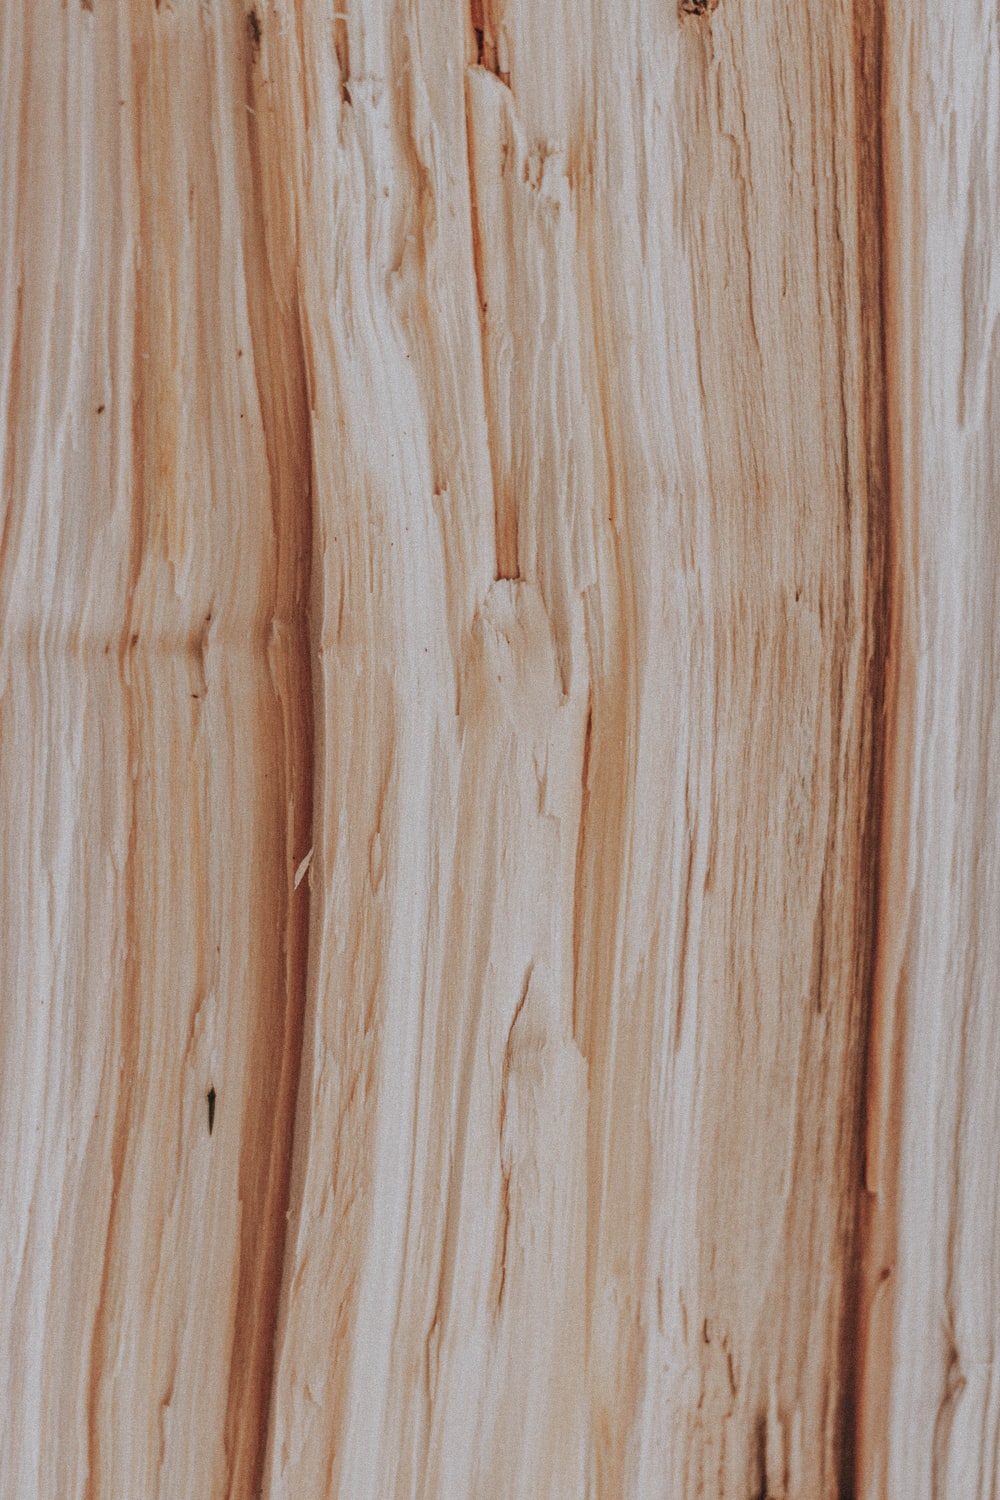 Plywood Picture. Download Free Image